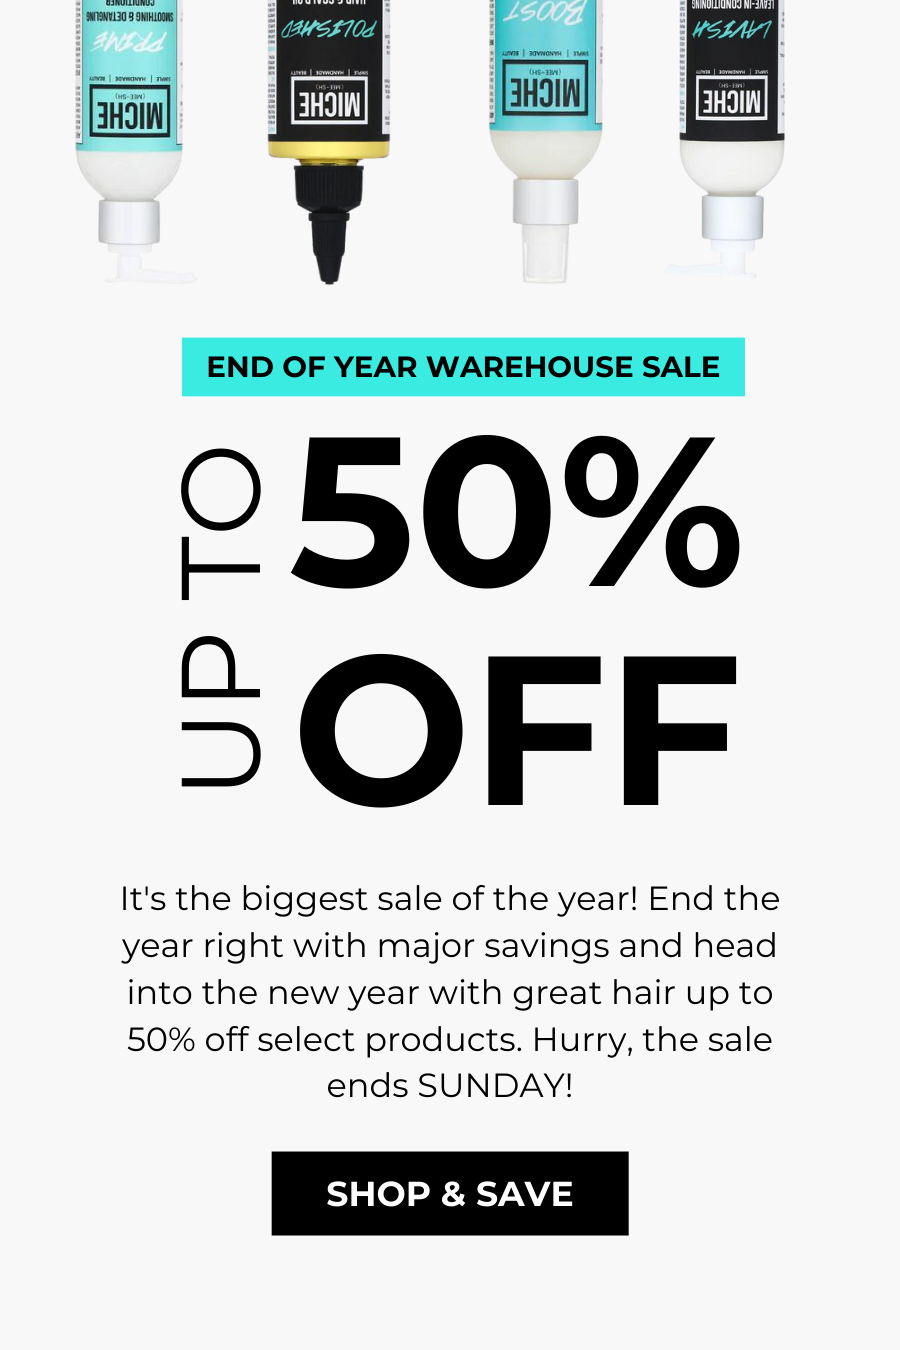  050% 5 OFF It's the biggest sale of the year! End the year right with major savings and head into the new year with great hair up to 50% off select products. Hurry, the sale ends SUNDAY! SHOP SAVE 